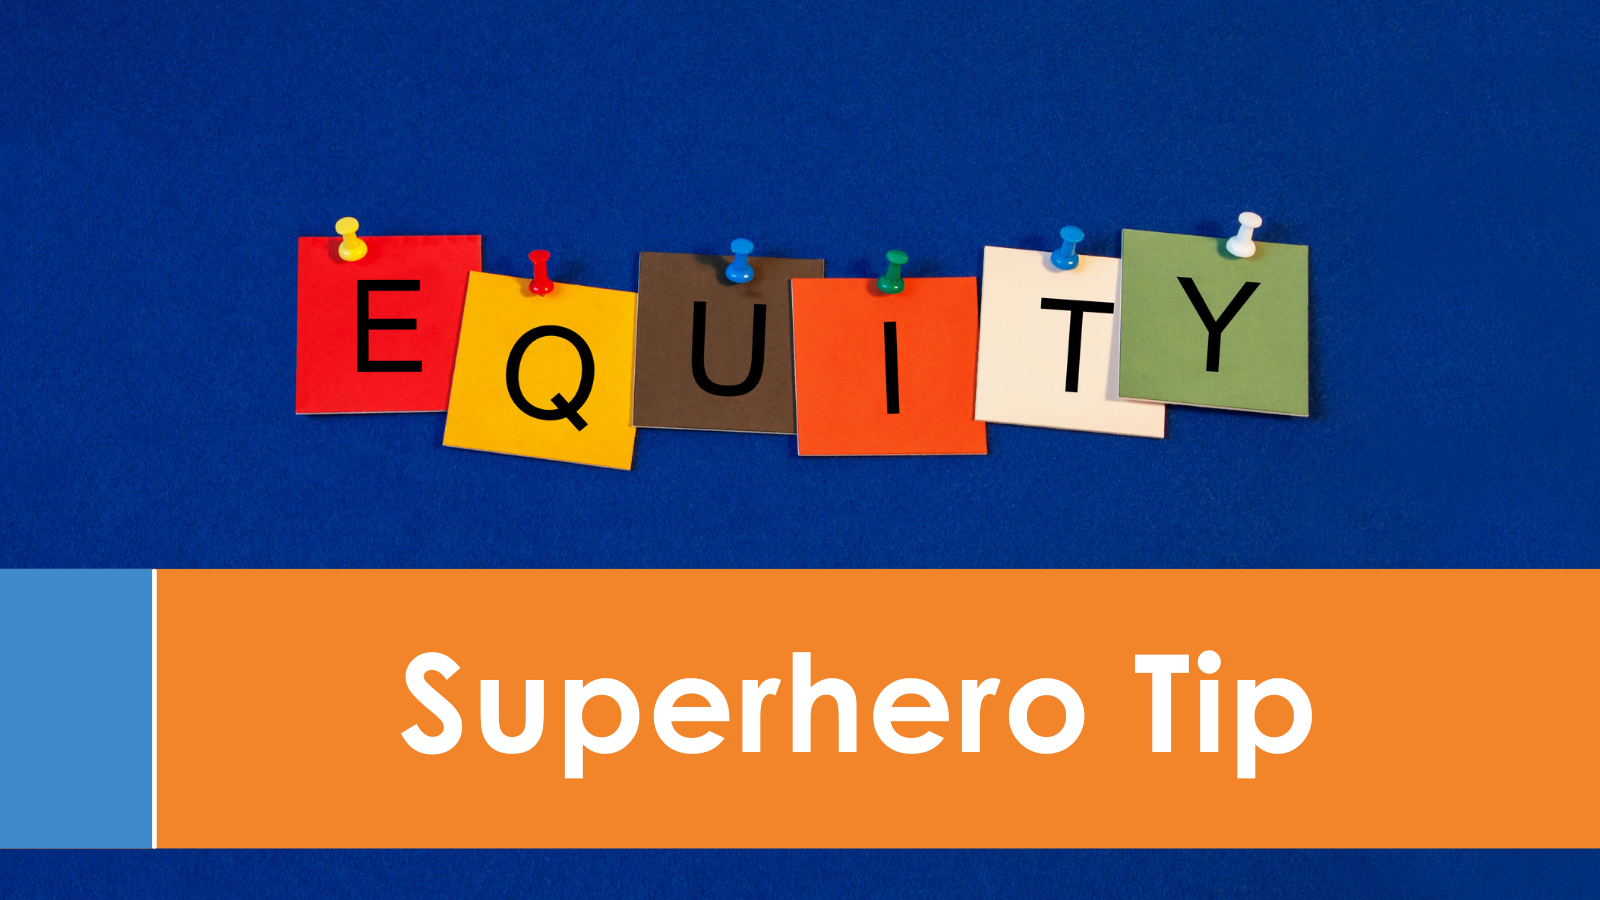 This final superhero tip is focusing on Equitable Systems Improvement, which is one of our Core Five Components from our C5 Intervention Program. Our focus in this tip will narrow on ensuring every student has access.